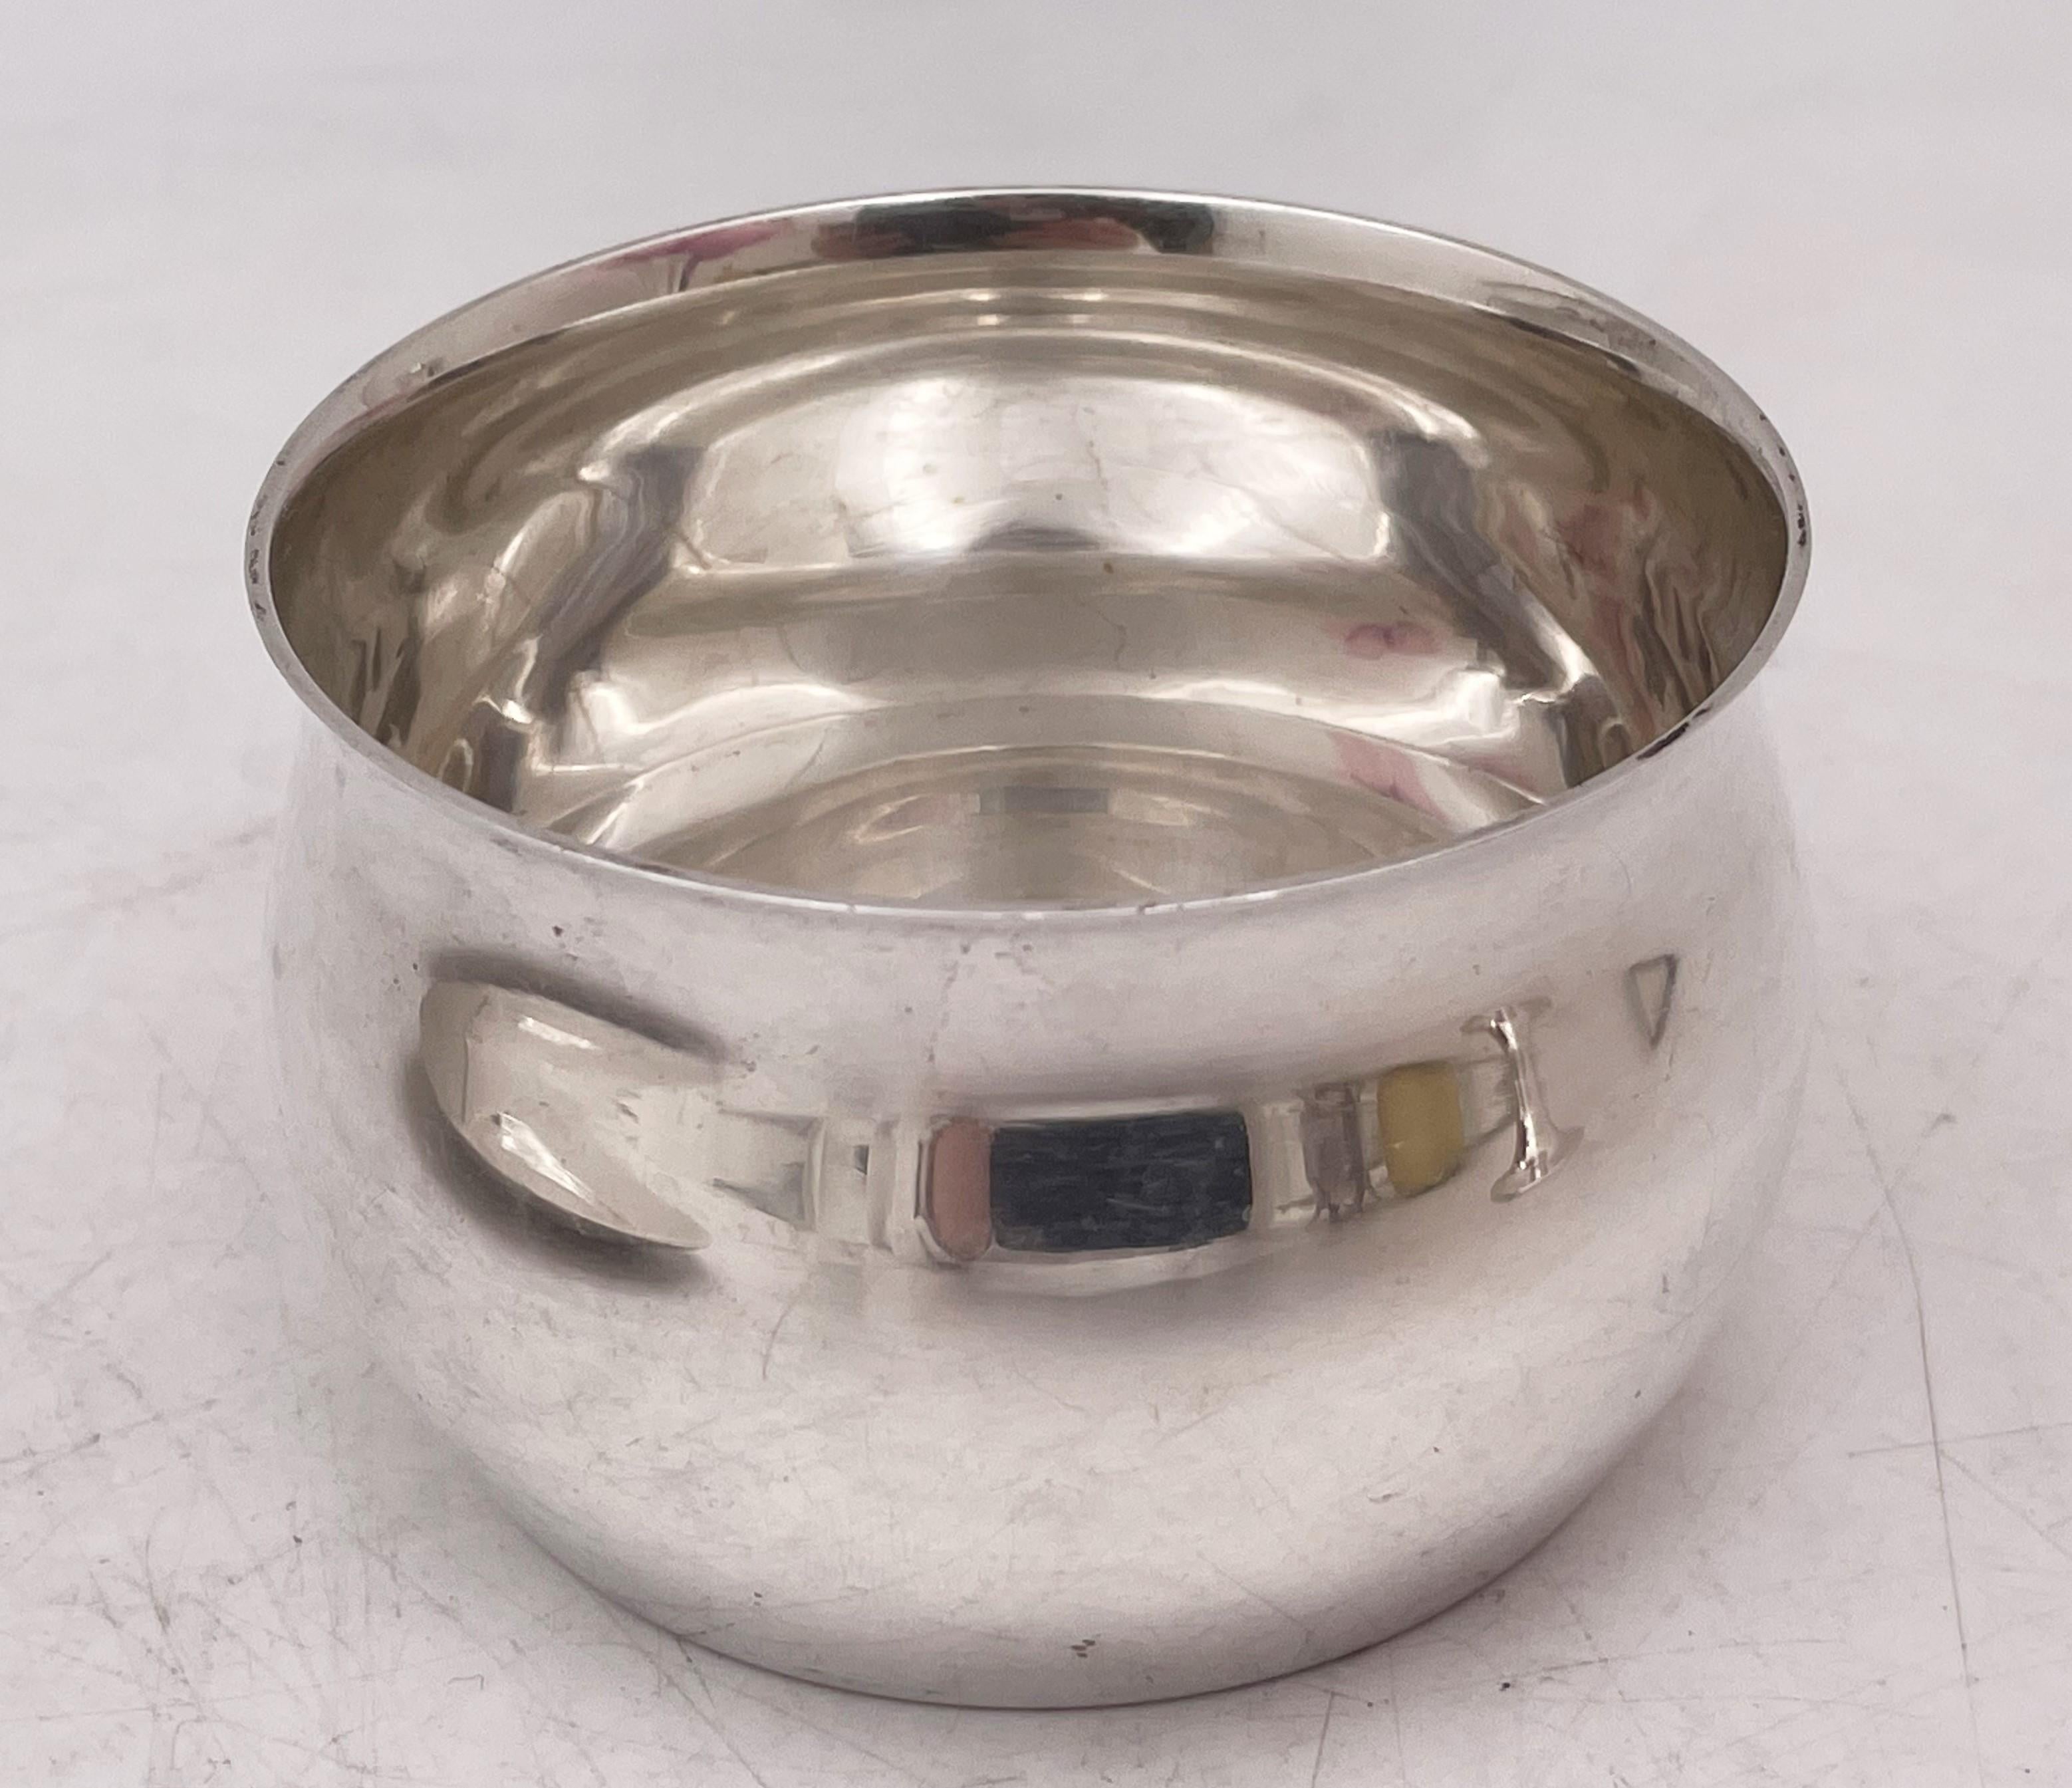 Tiffany & Co. sterling silver cup (in pattern number 23321 from 1950) and saucer (in pattern number 22739 from 19390 in Mid-Century Modern style with an elegant, geometric design. The cup measures 1 7/8'' in height 2 7/8'' in diameter at the top.